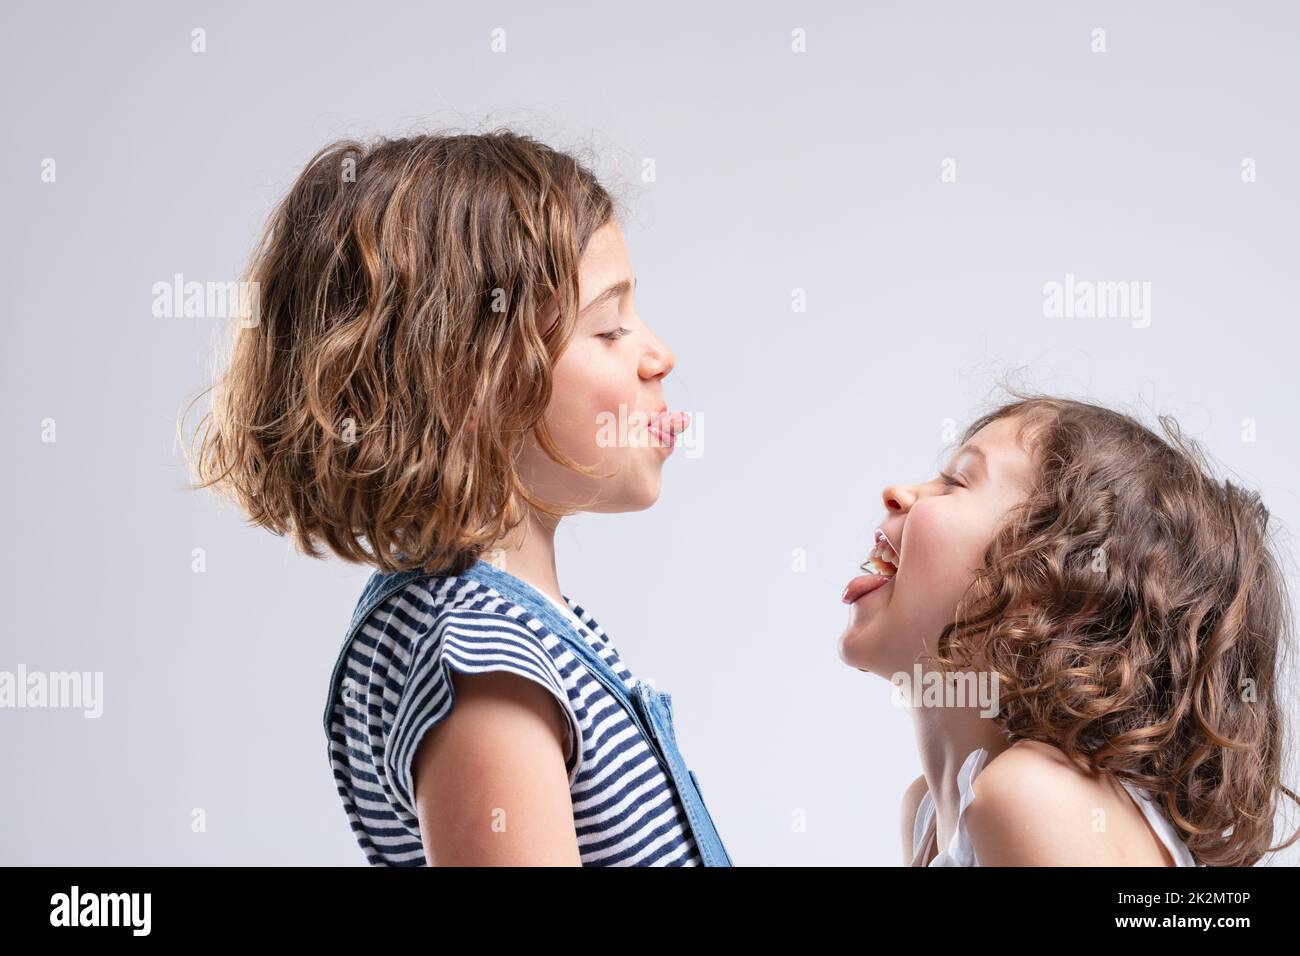 Two naughty young girls sticking out their tongues Stock Photo